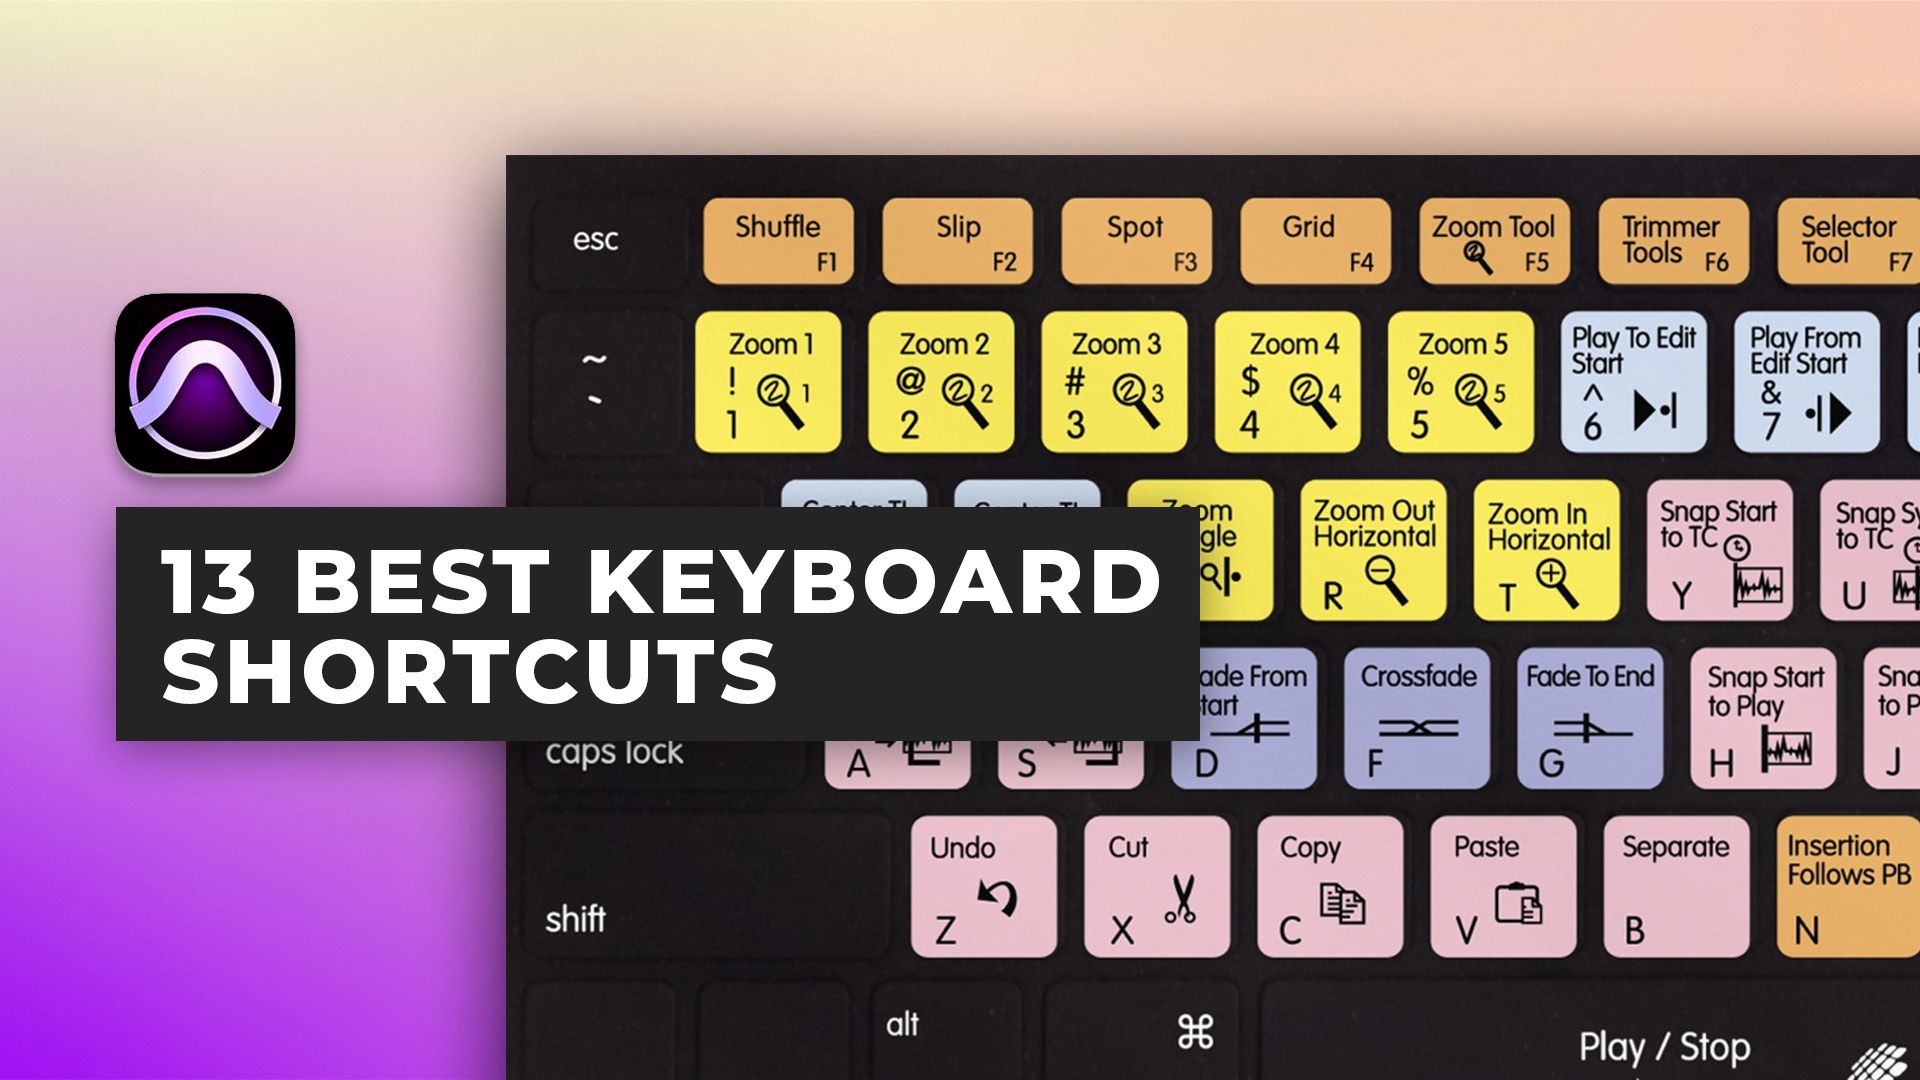 The 13 best keyboard shortcuts in Pro Tools